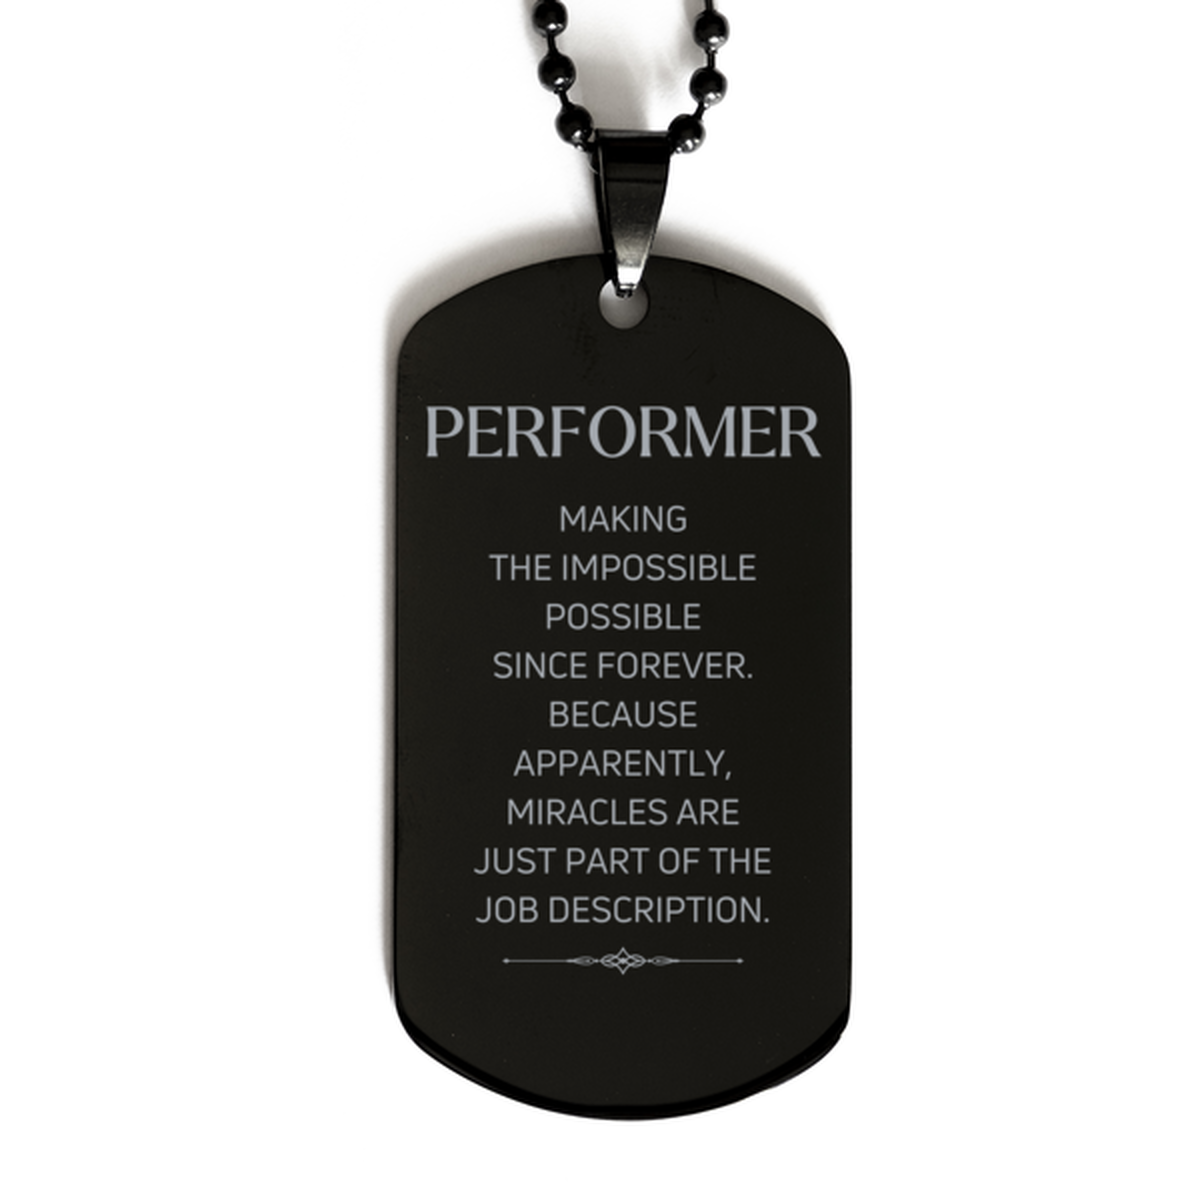 Funny Performer Gifts, Miracles are just part of the job description, Inspirational Birthday Black Dog Tag For Performer, Men, Women, Coworkers, Friends, Boss